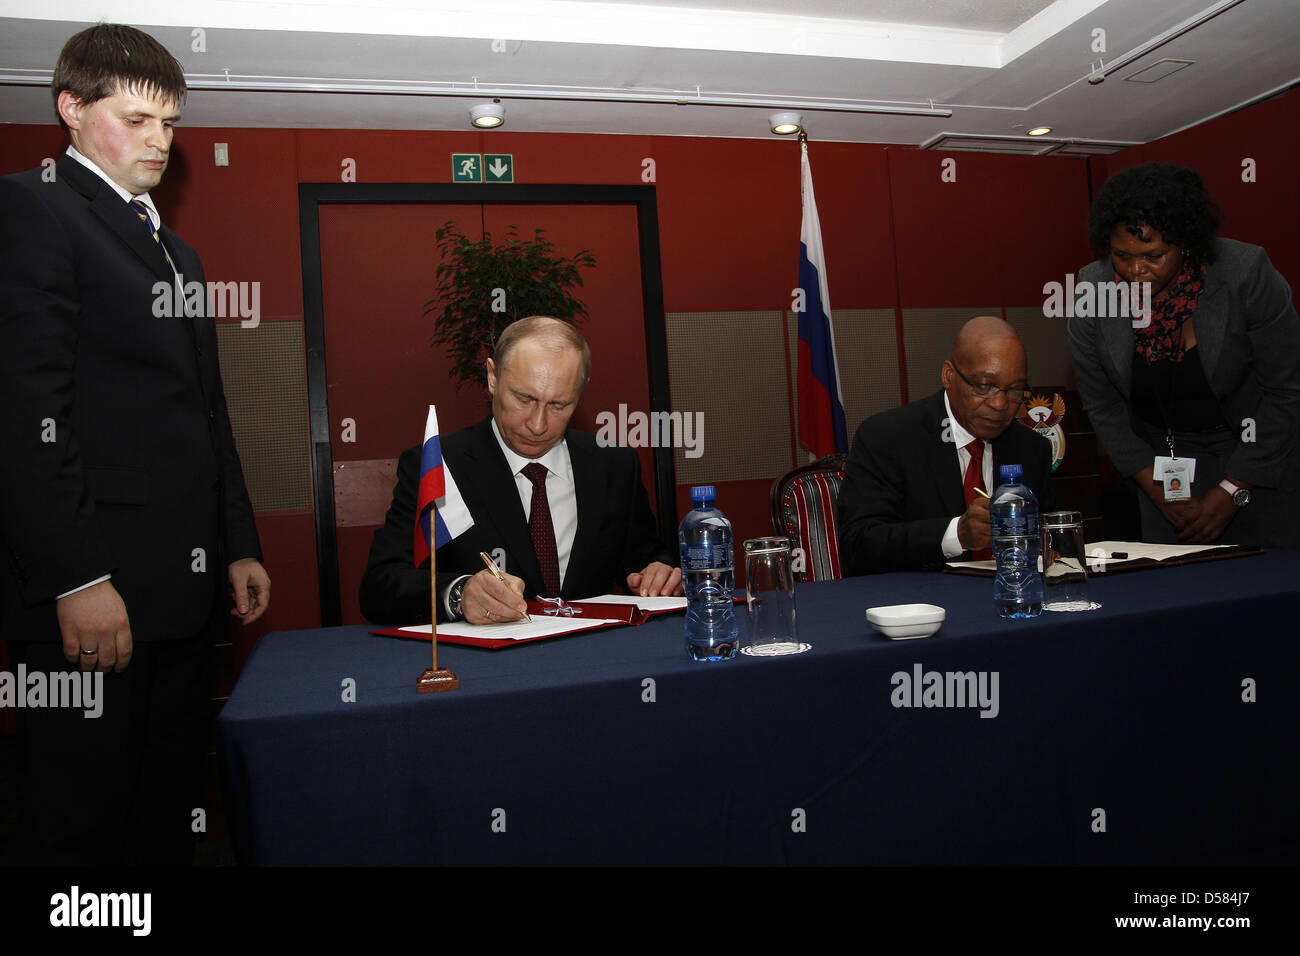 Durban, South Africa, USA. 26th March, 2013. Russian president Vladimeir Putin and South African President Jacob Zuma sign the Durban Declaration for Strategic Partnership - a cooperation agreement that aims to cement diplomatic relations between the two countries. The two signed the declaration ahead of the Fith Brics Summit beinbg held in the city. Picture: Giordano Stolley/Alamy Live News Stock Photo